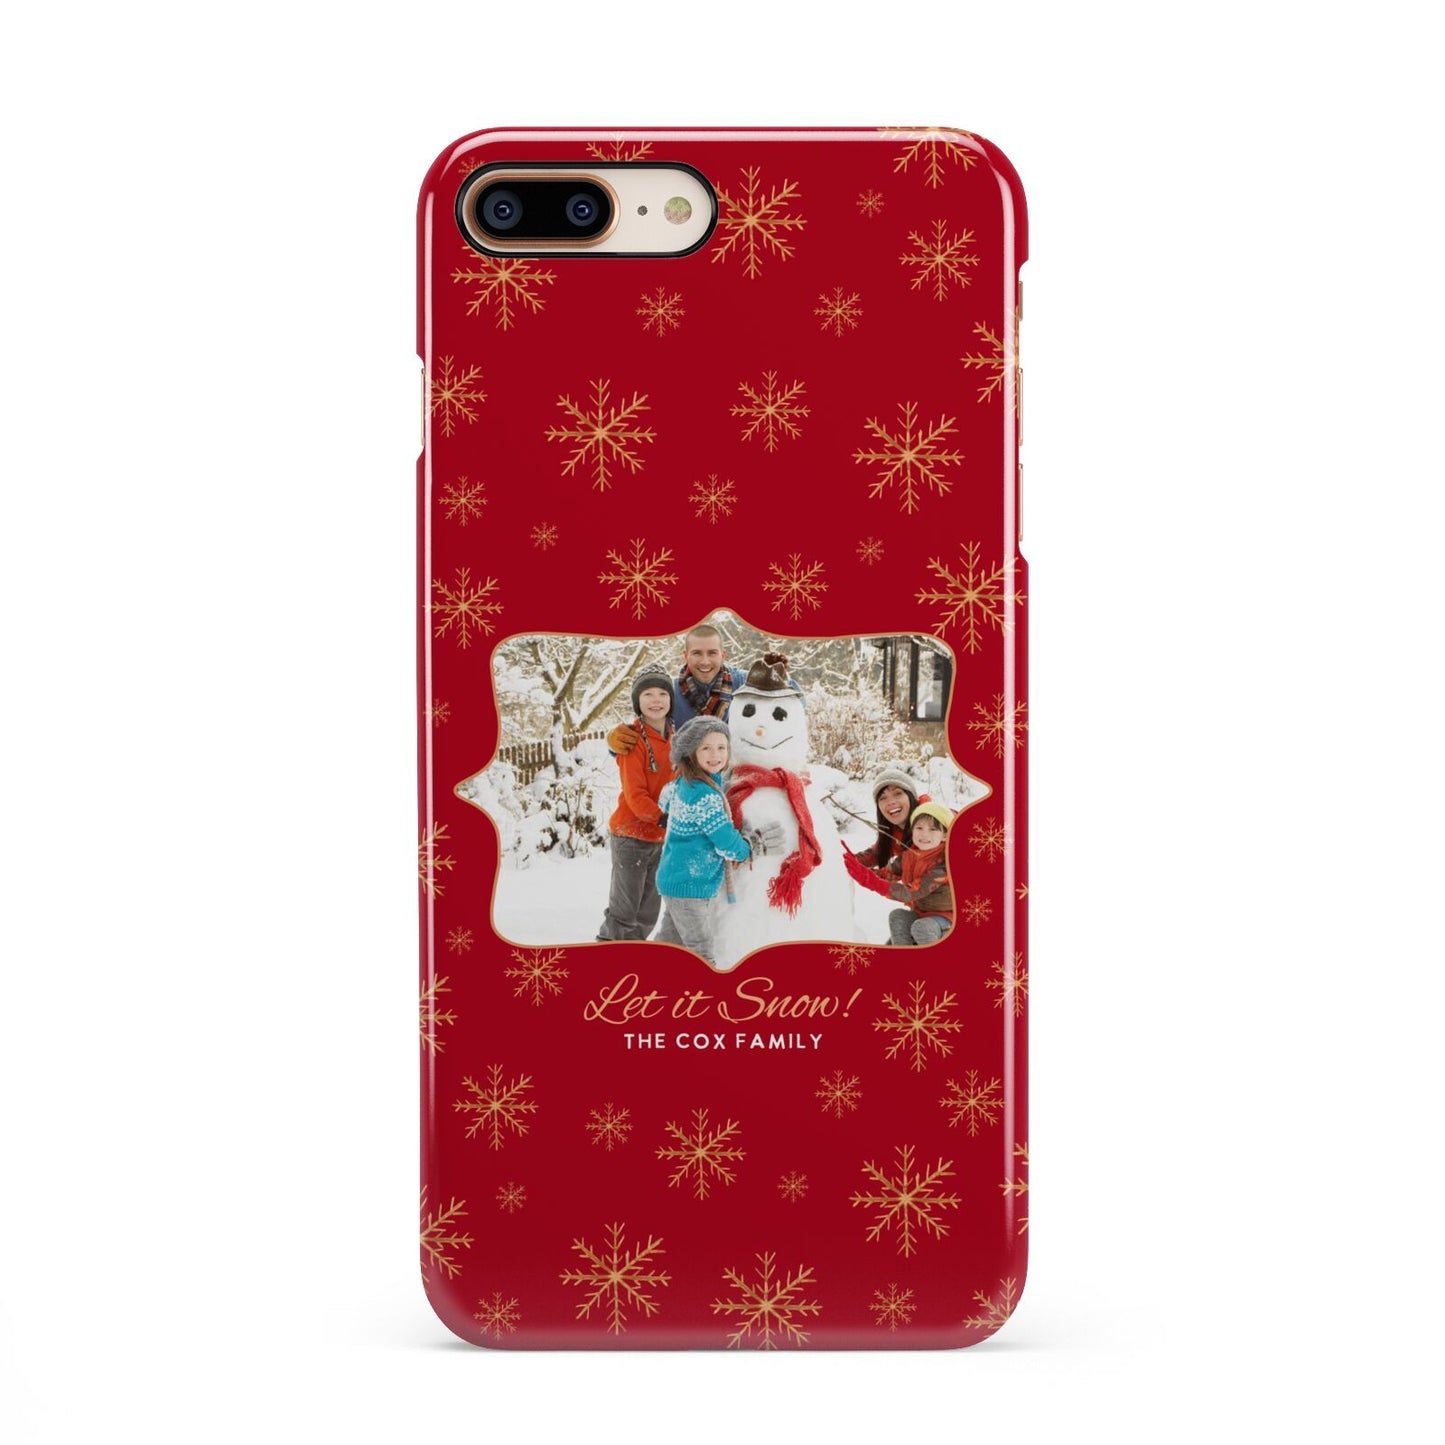 Let it Snow Christmas Photo Upload iPhone 8 Plus 3D Snap Case on Gold Phone